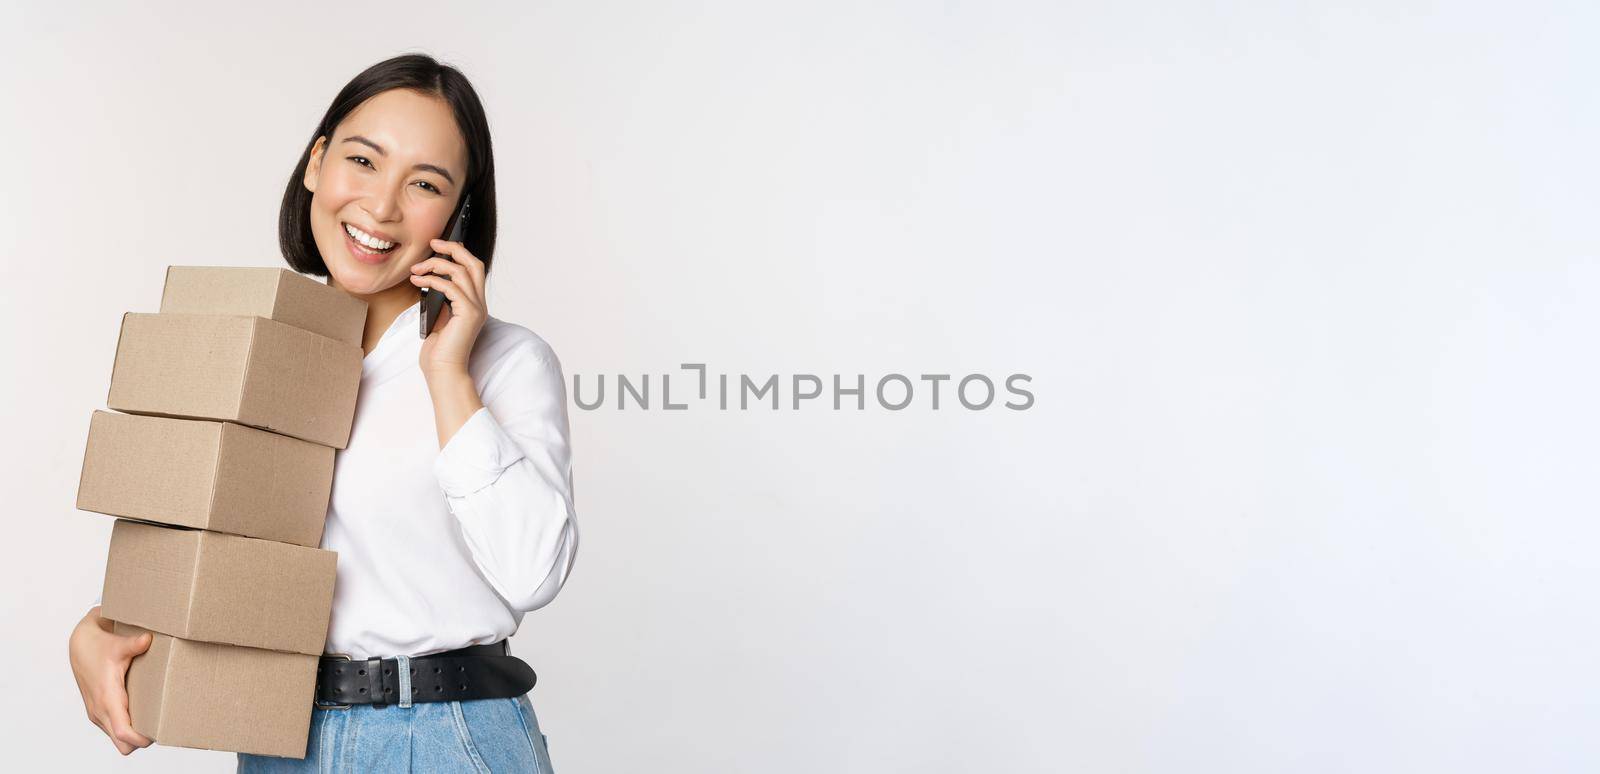 Image of young asian businesswoman answer phone call while carrying boxes for delivery, posing against white background.